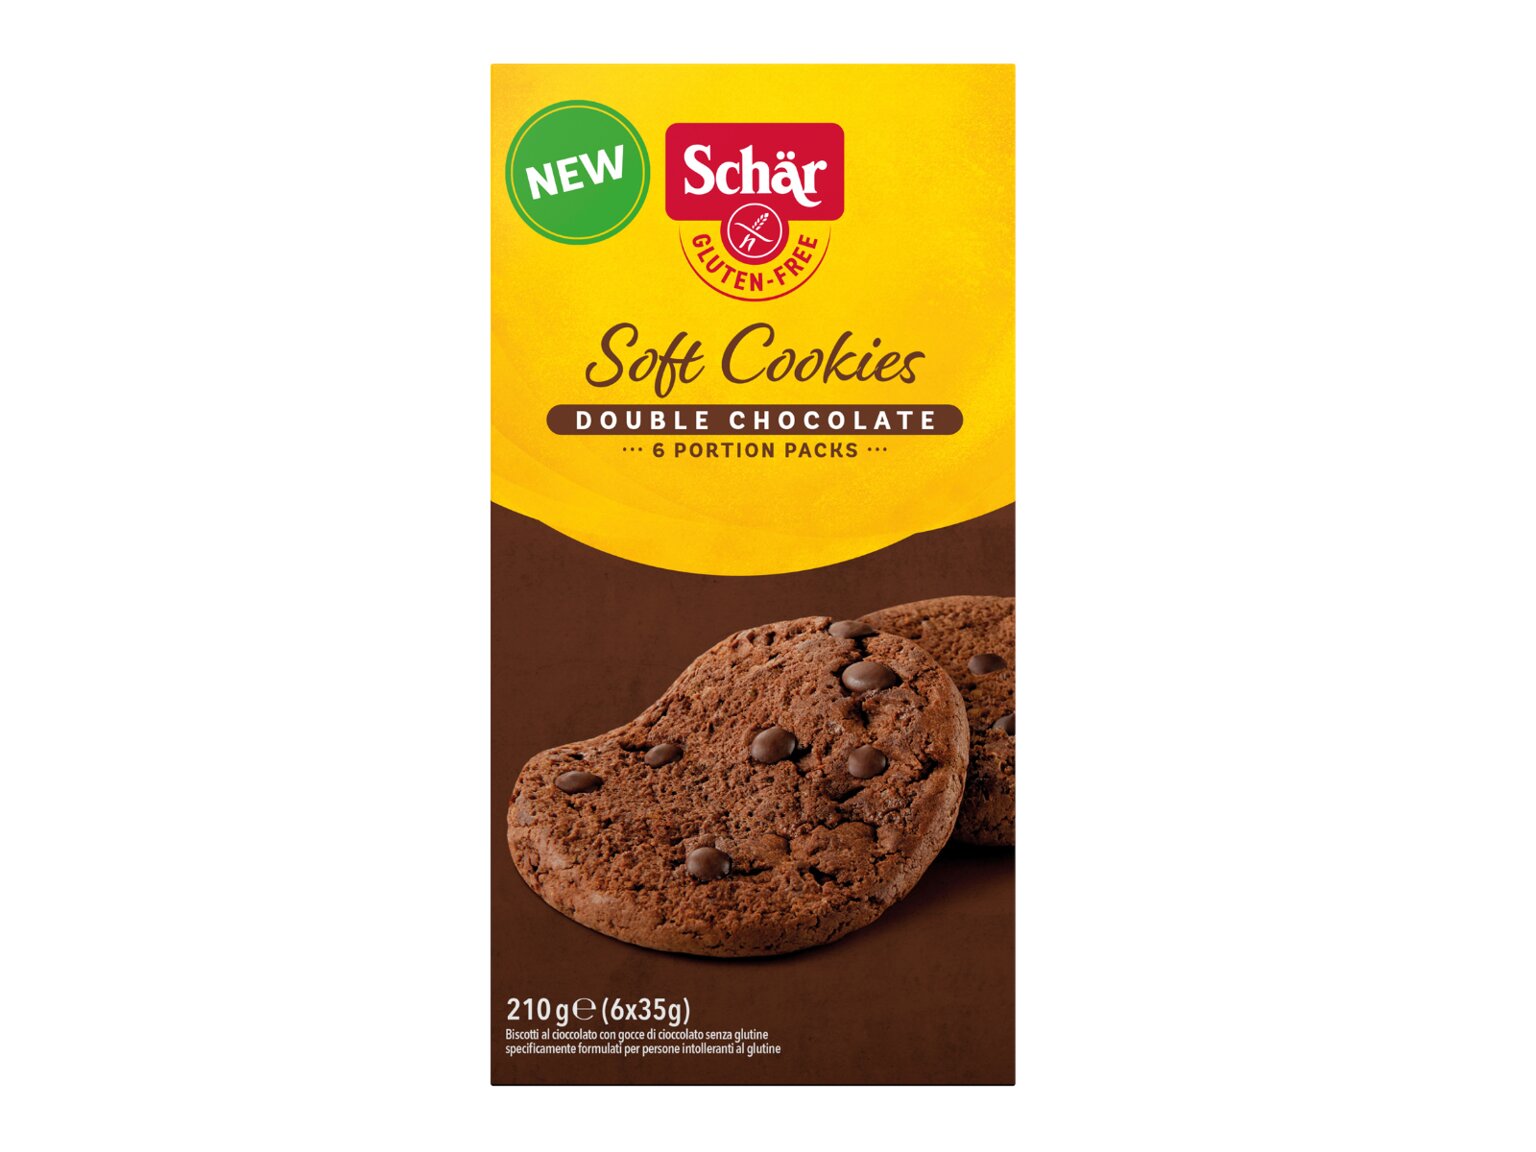 SOFT COOKIES DOUBLE CHOCOLATE